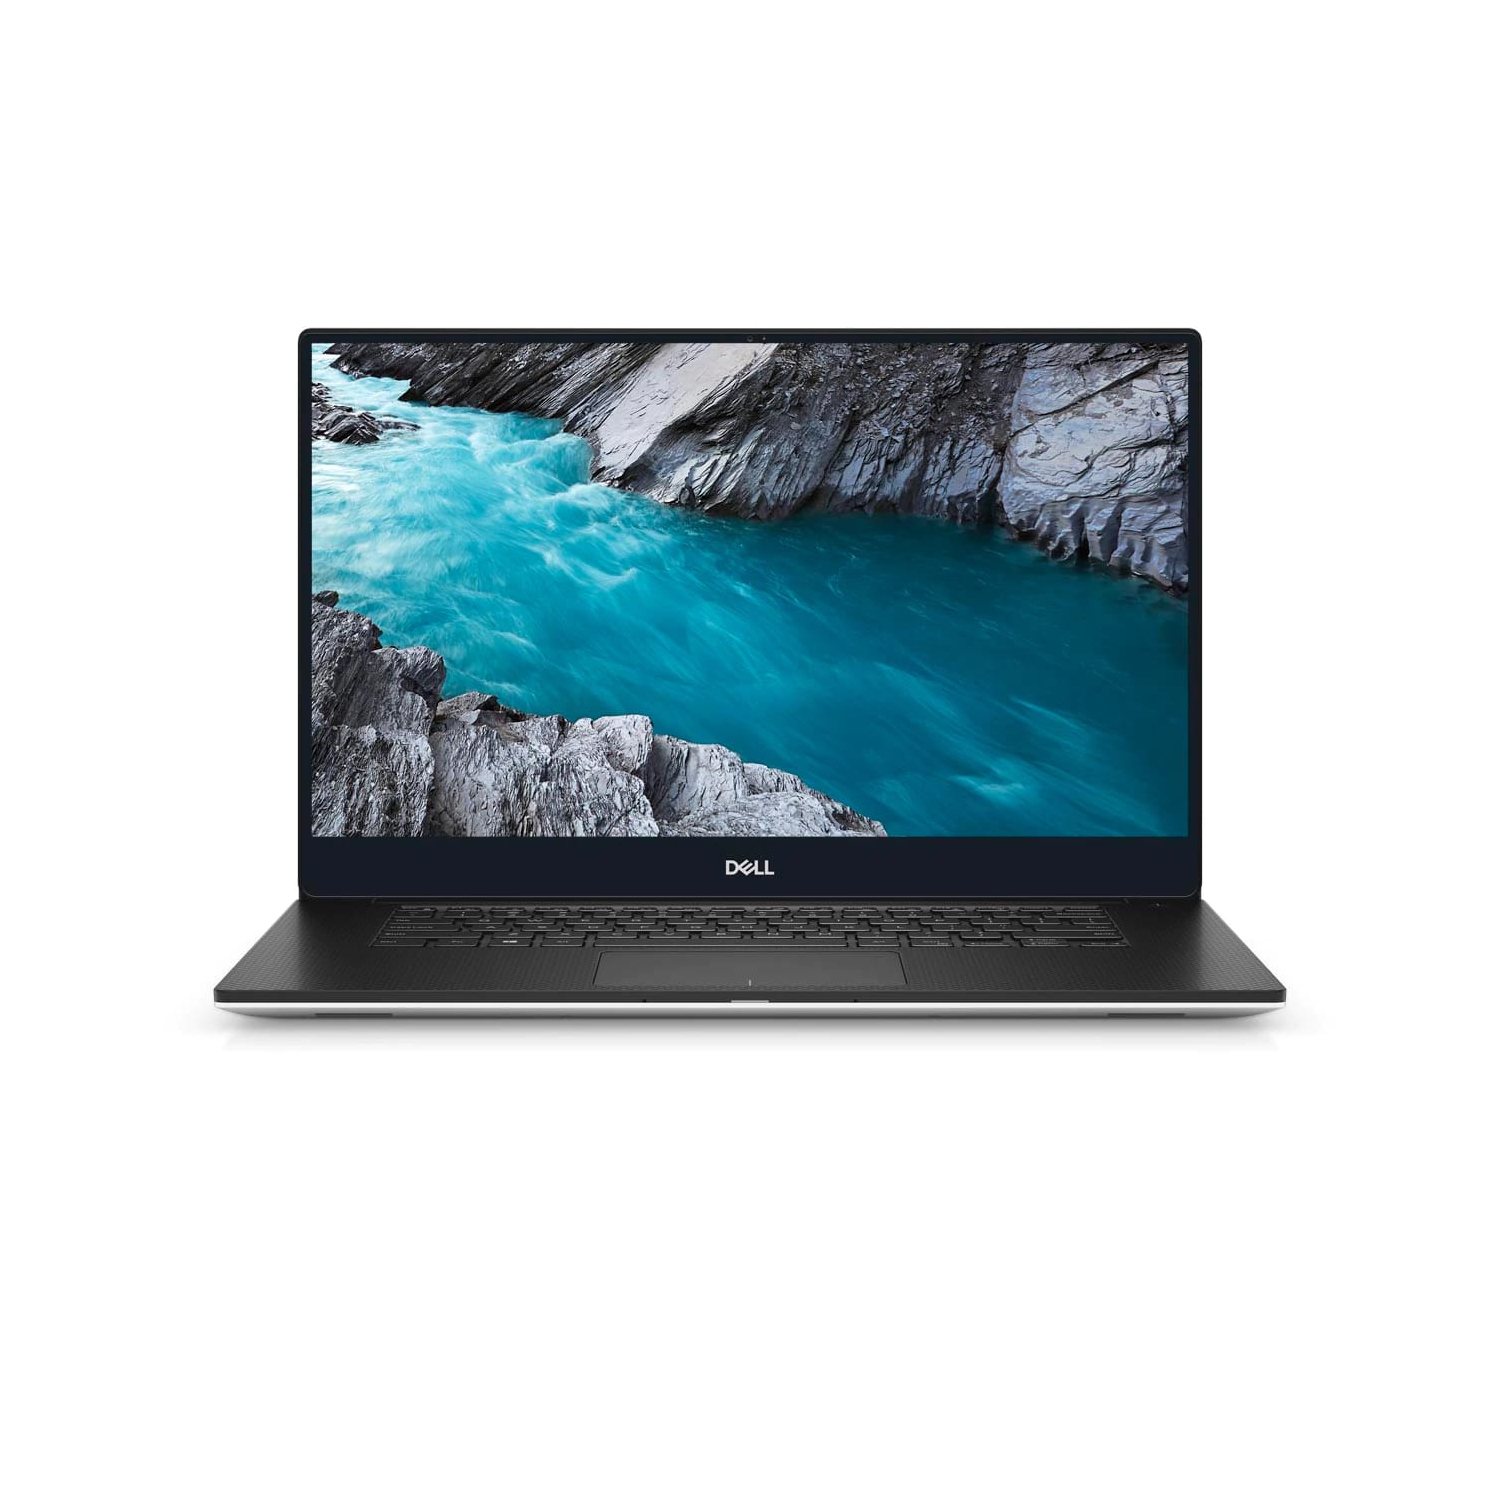 Refurbished (Good) - Dell XPS 15 7590 Laptop (2019) | 15.6" 4K | Core i7 - 1TB SSD - 32GB RAM - GTX 1650 | 6 Cores @ 4.5 GHz